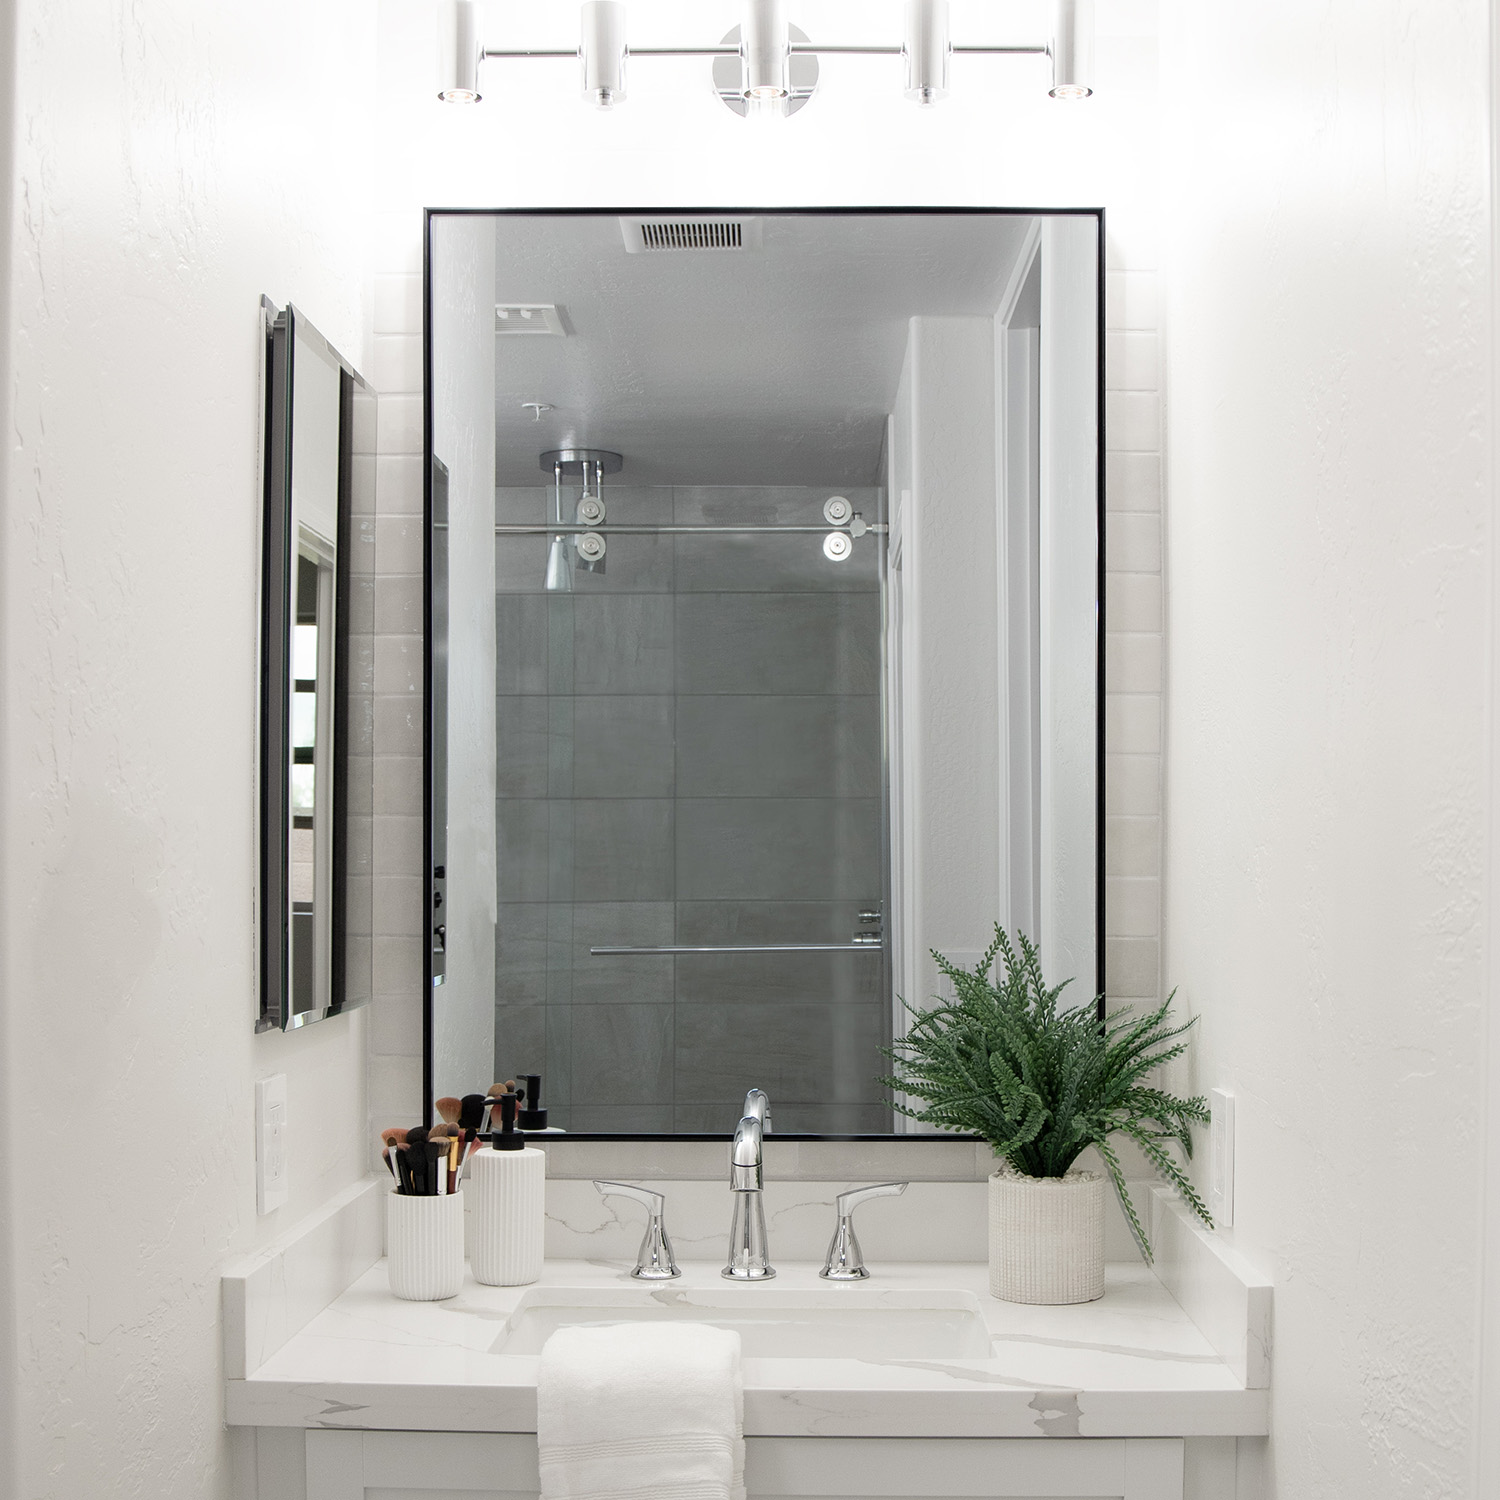 Infinity Black Framed Mirror in Neutral, White and Gray Bathroom